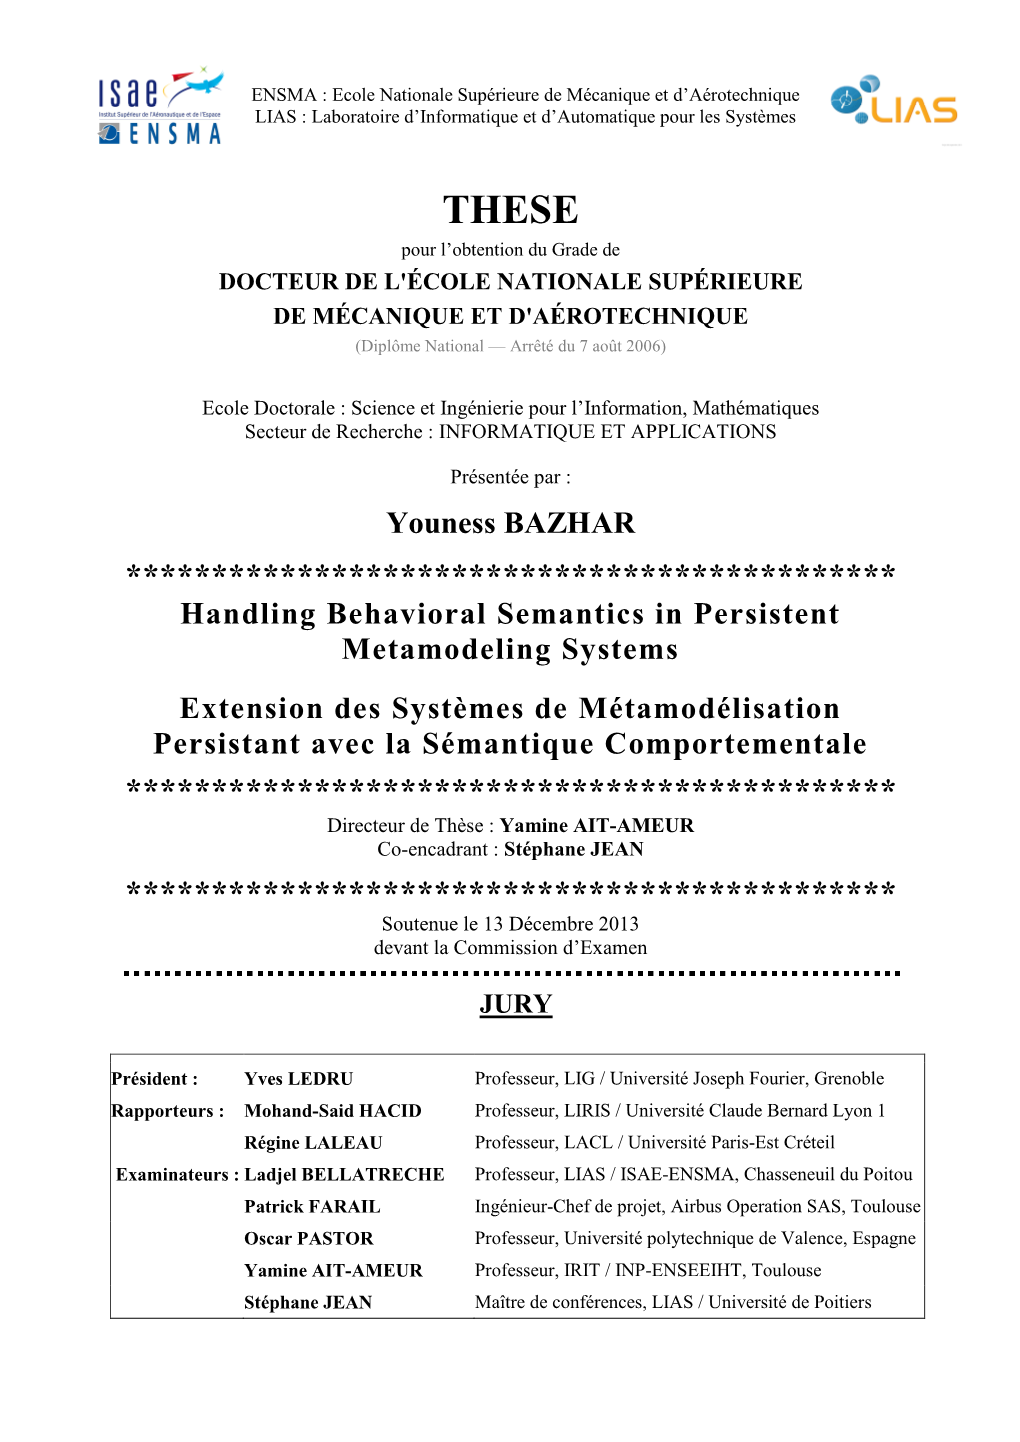 Youness BAZHAR Phd Thesis